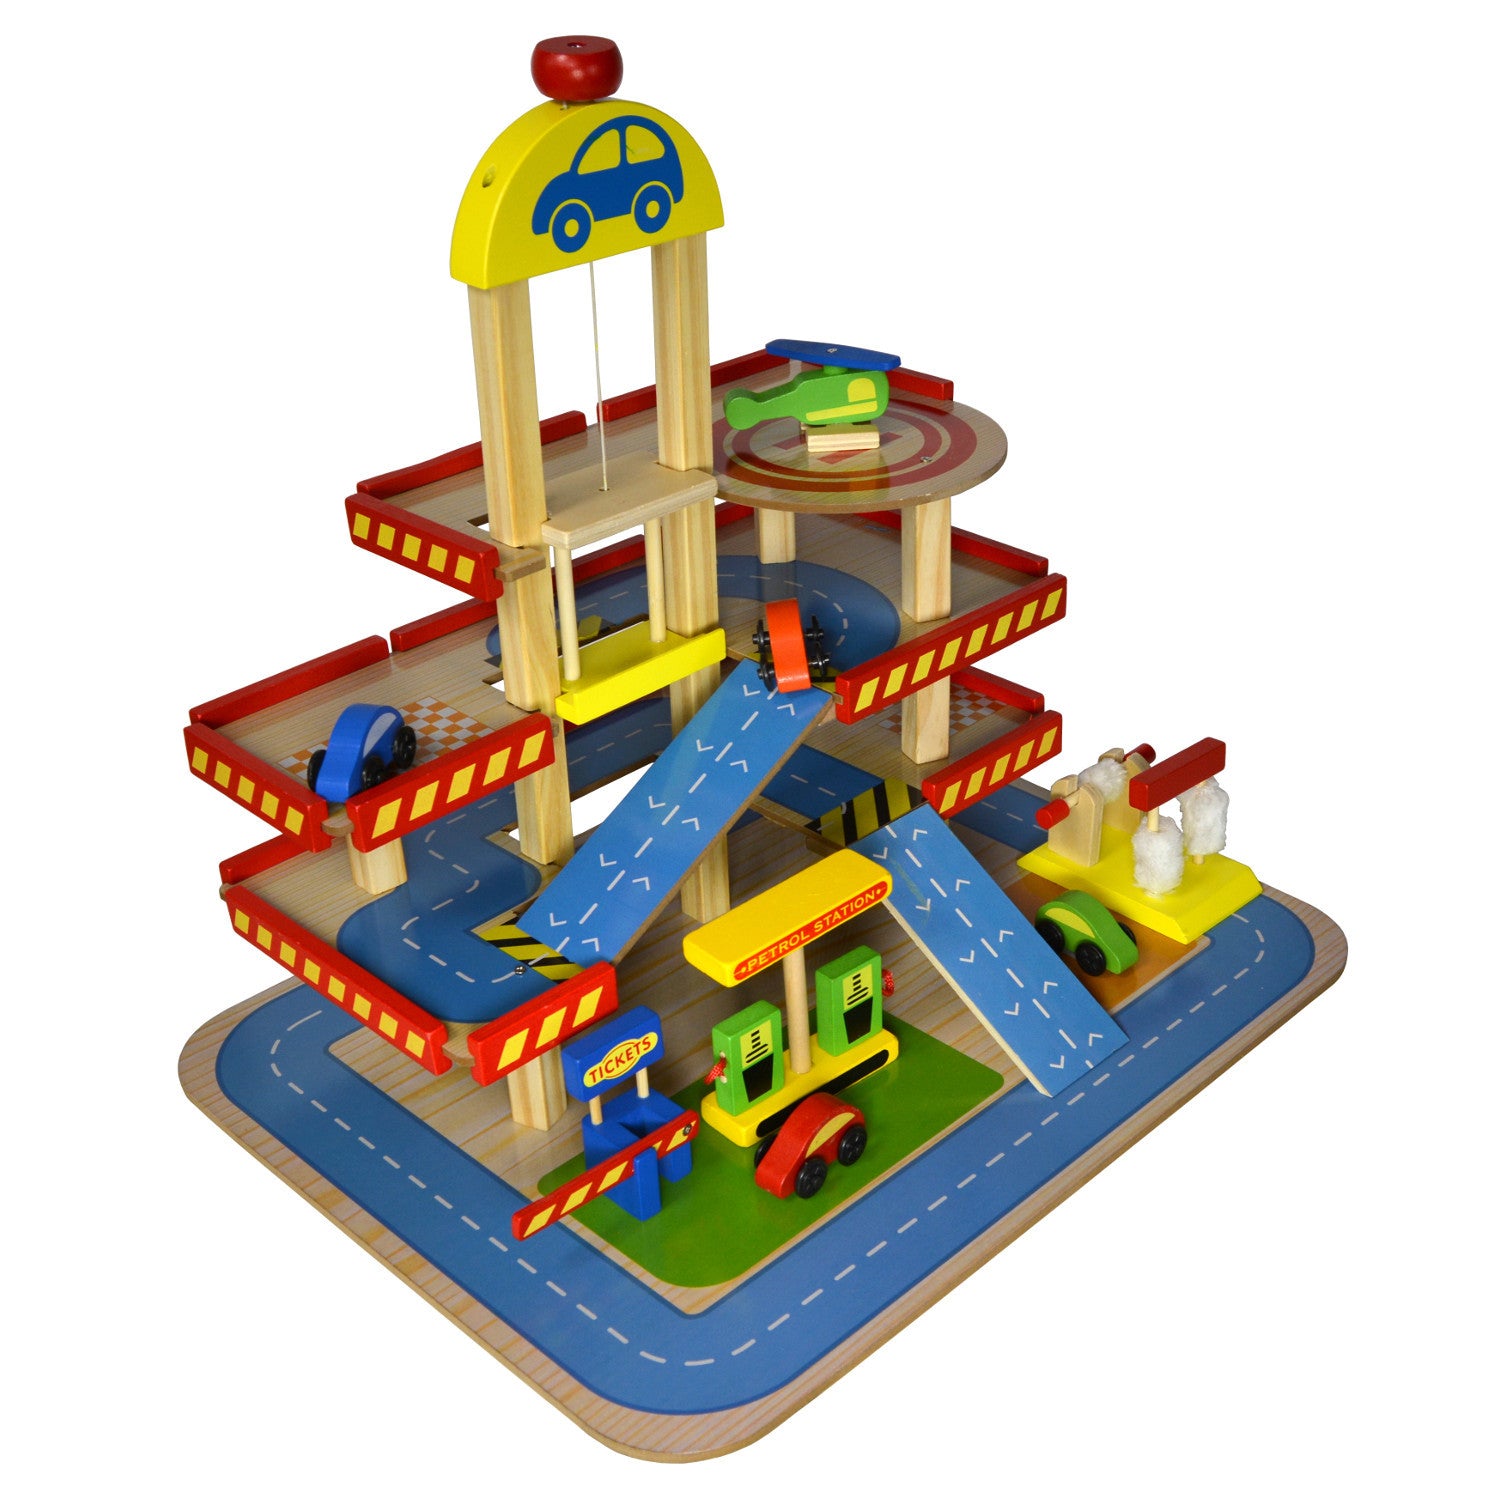 wooden toy sets